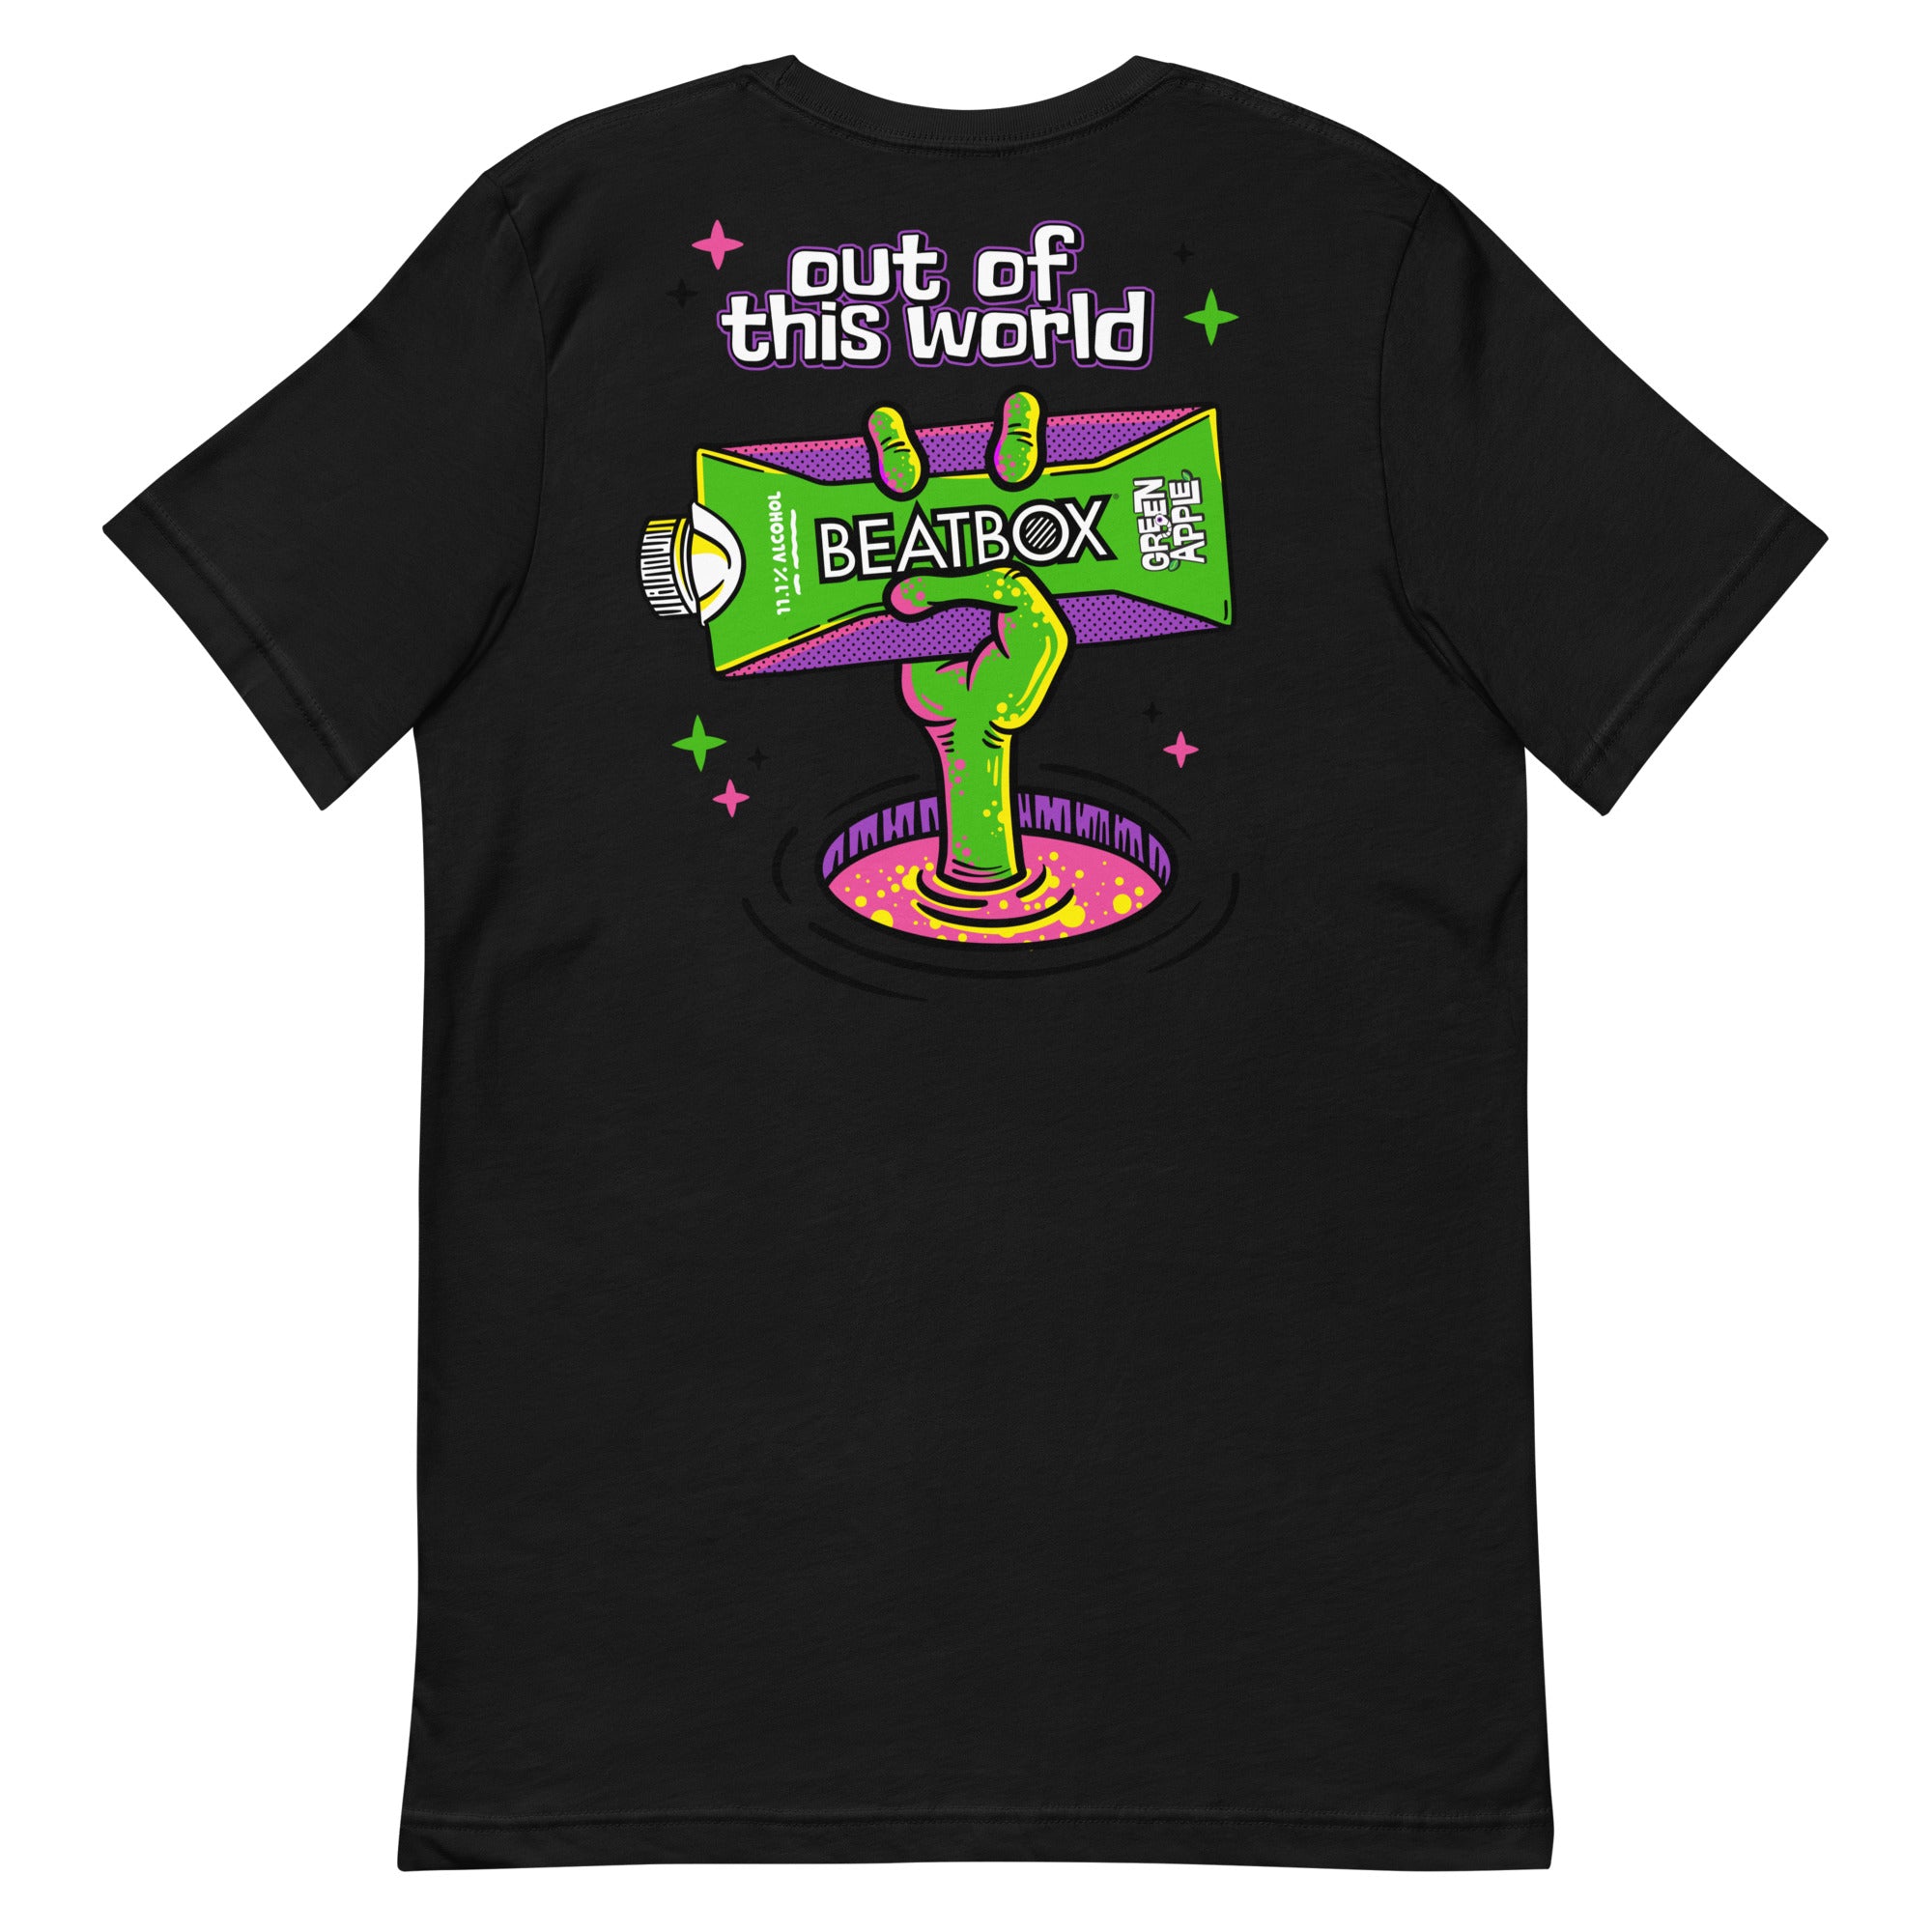 Out of This World t-shirt